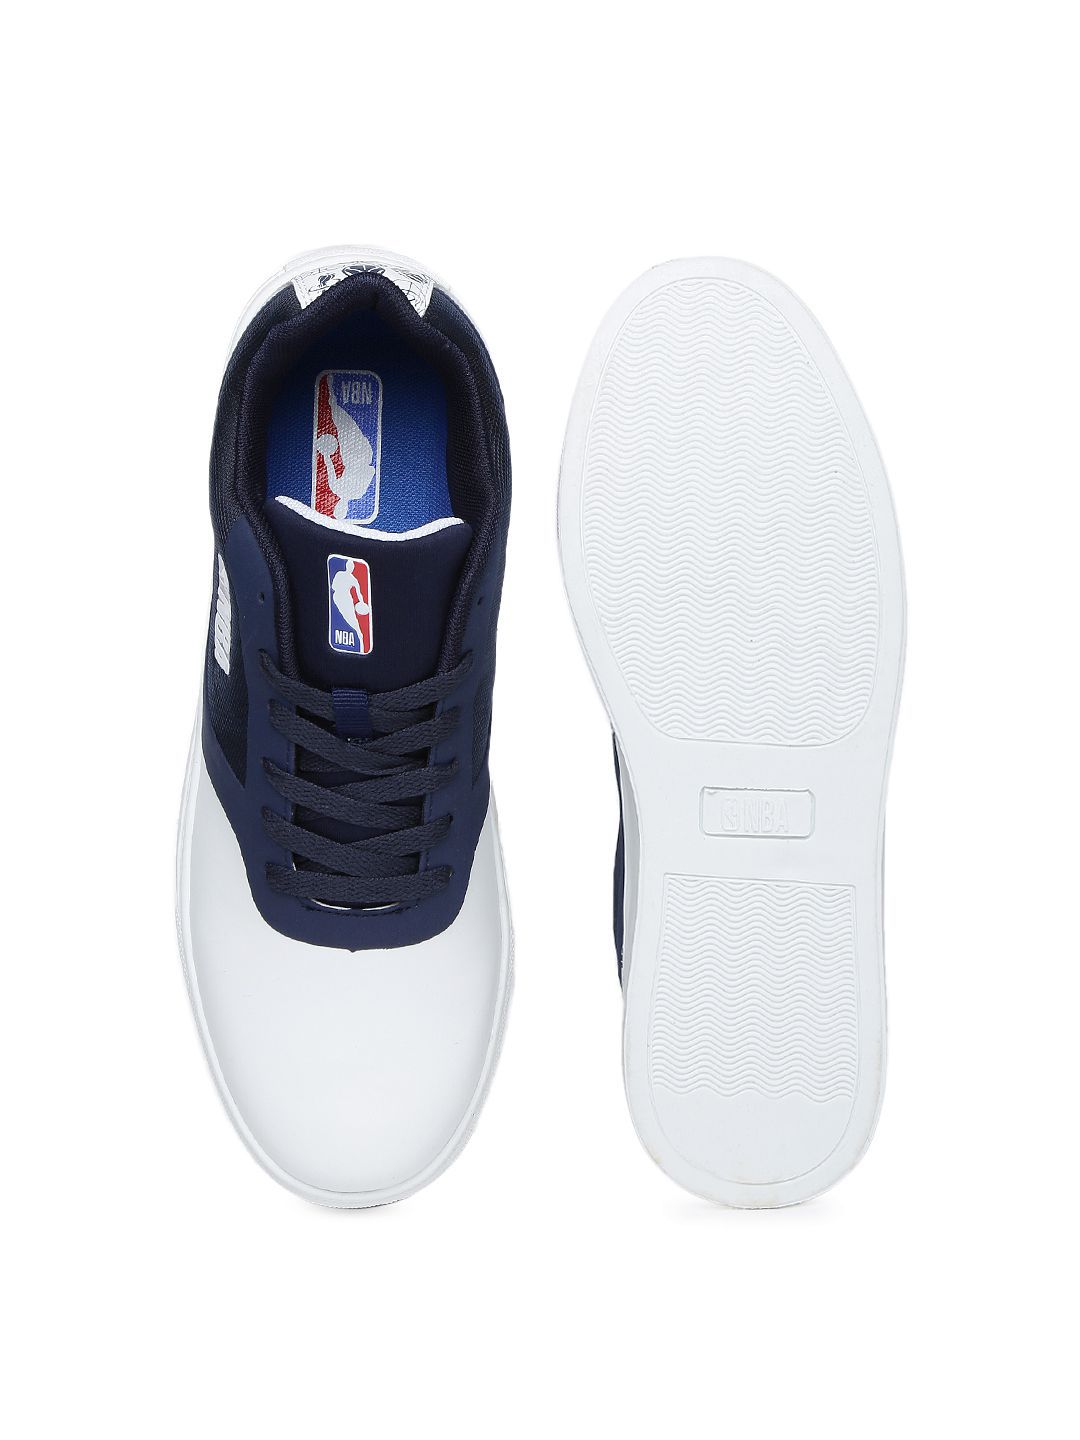 NBA Sneakers Navy Casual Shoes - Buy 